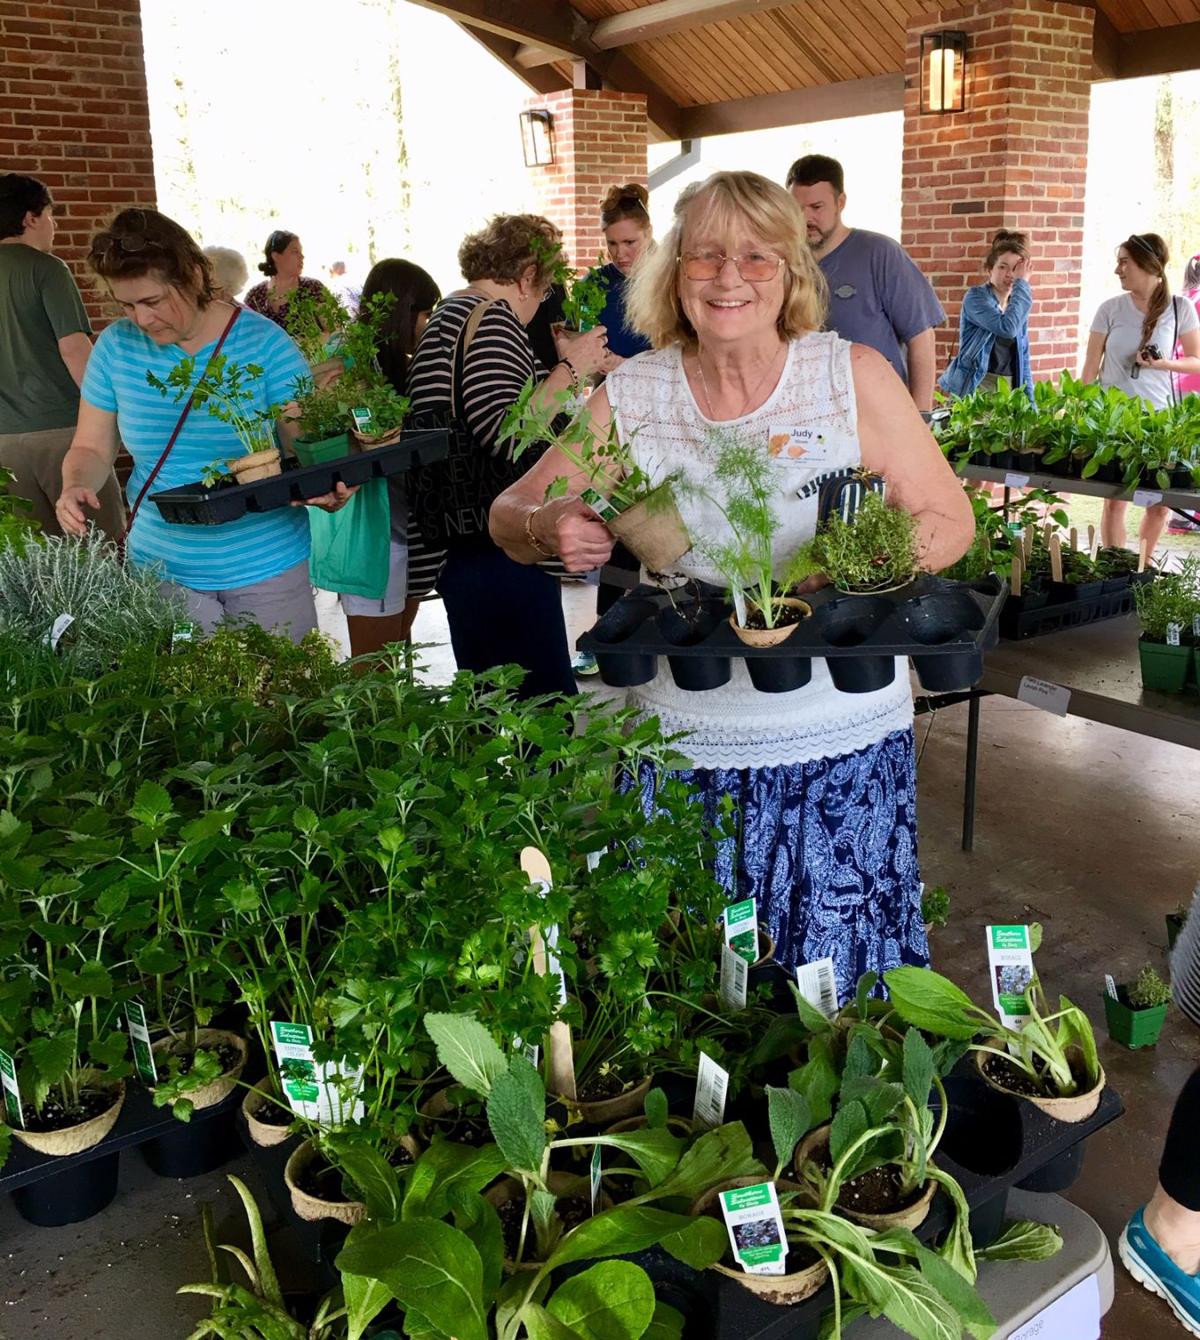 Herb Day educates visitors about uses and benefits of herbs Daily